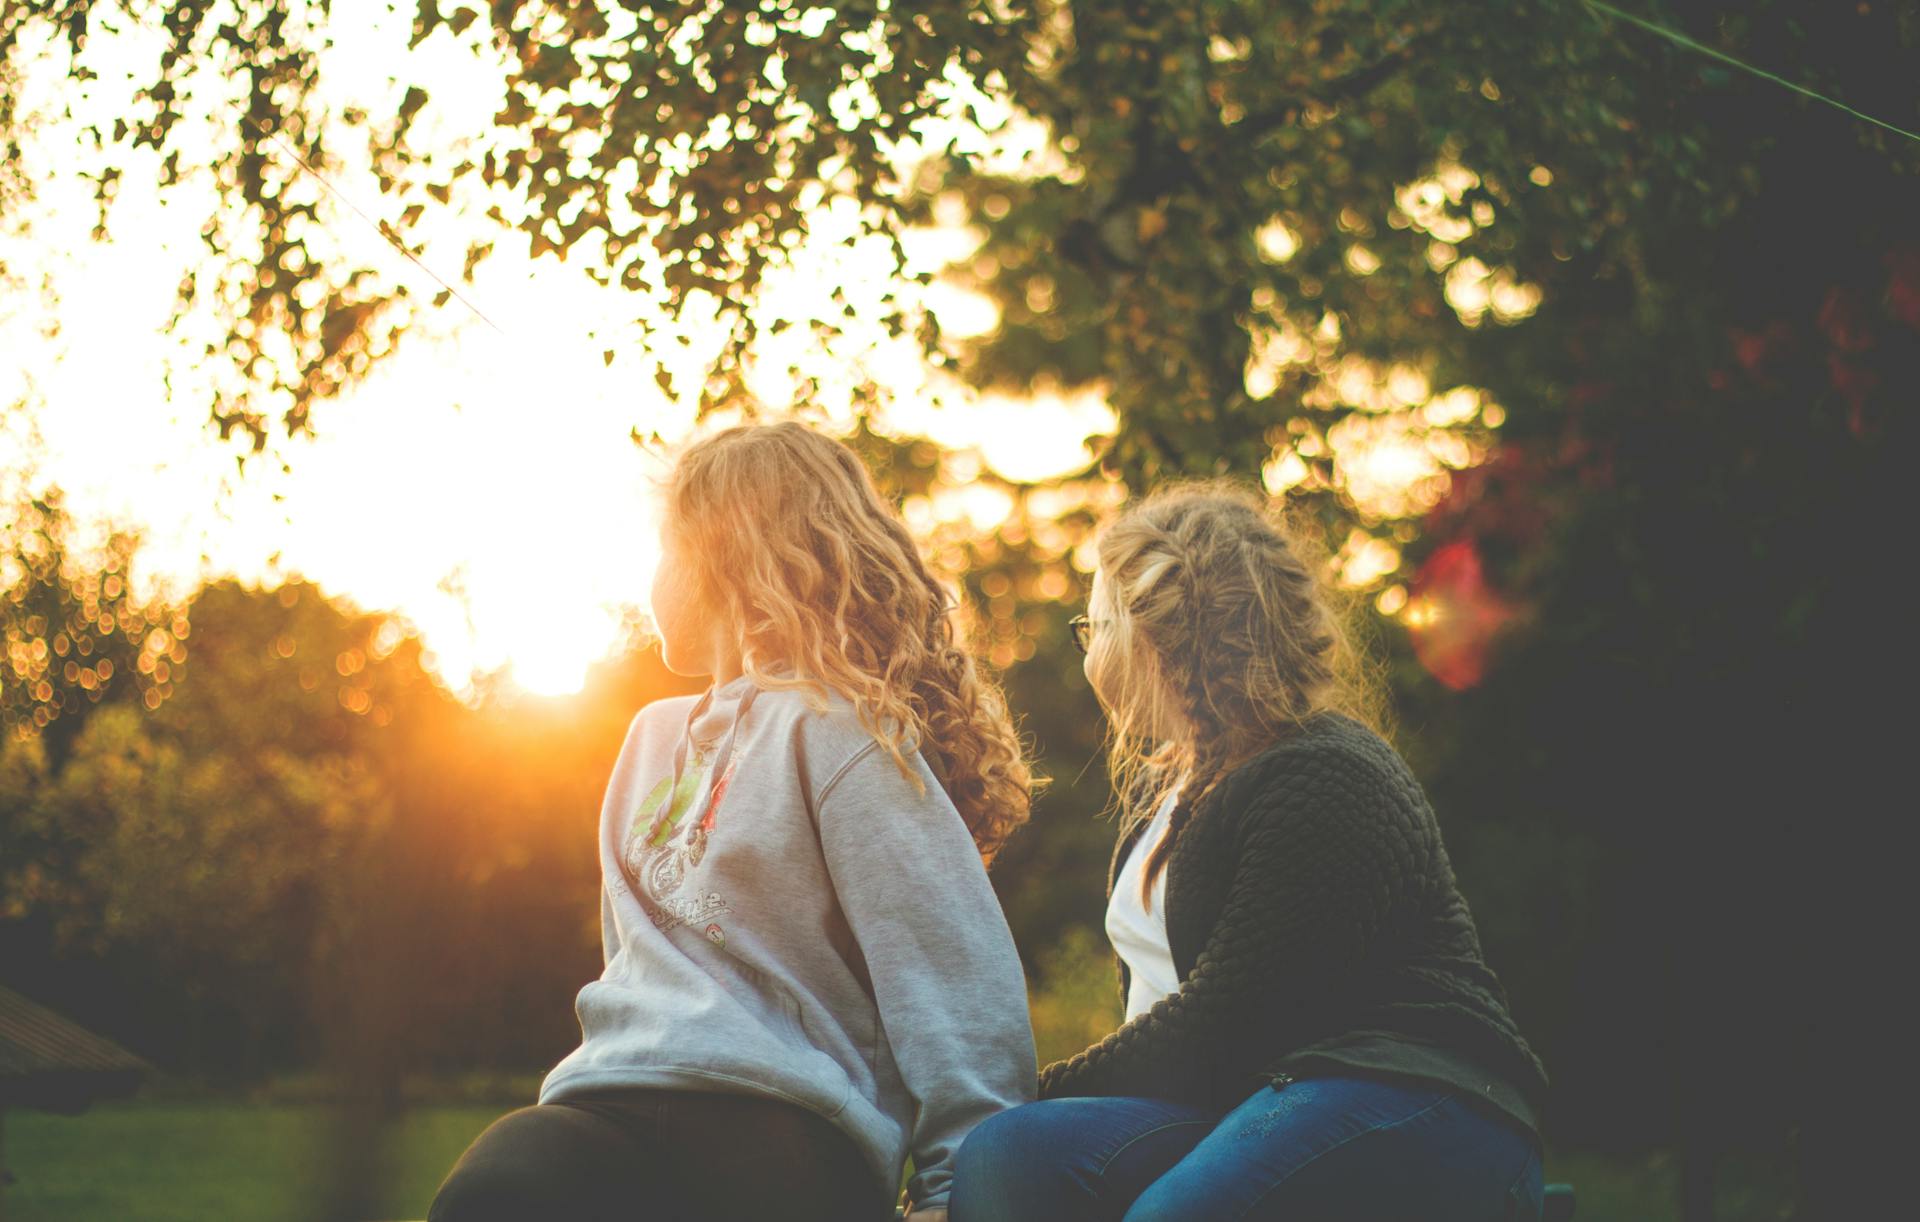 Two women sitting near a tree during sunset | Source: Pexels